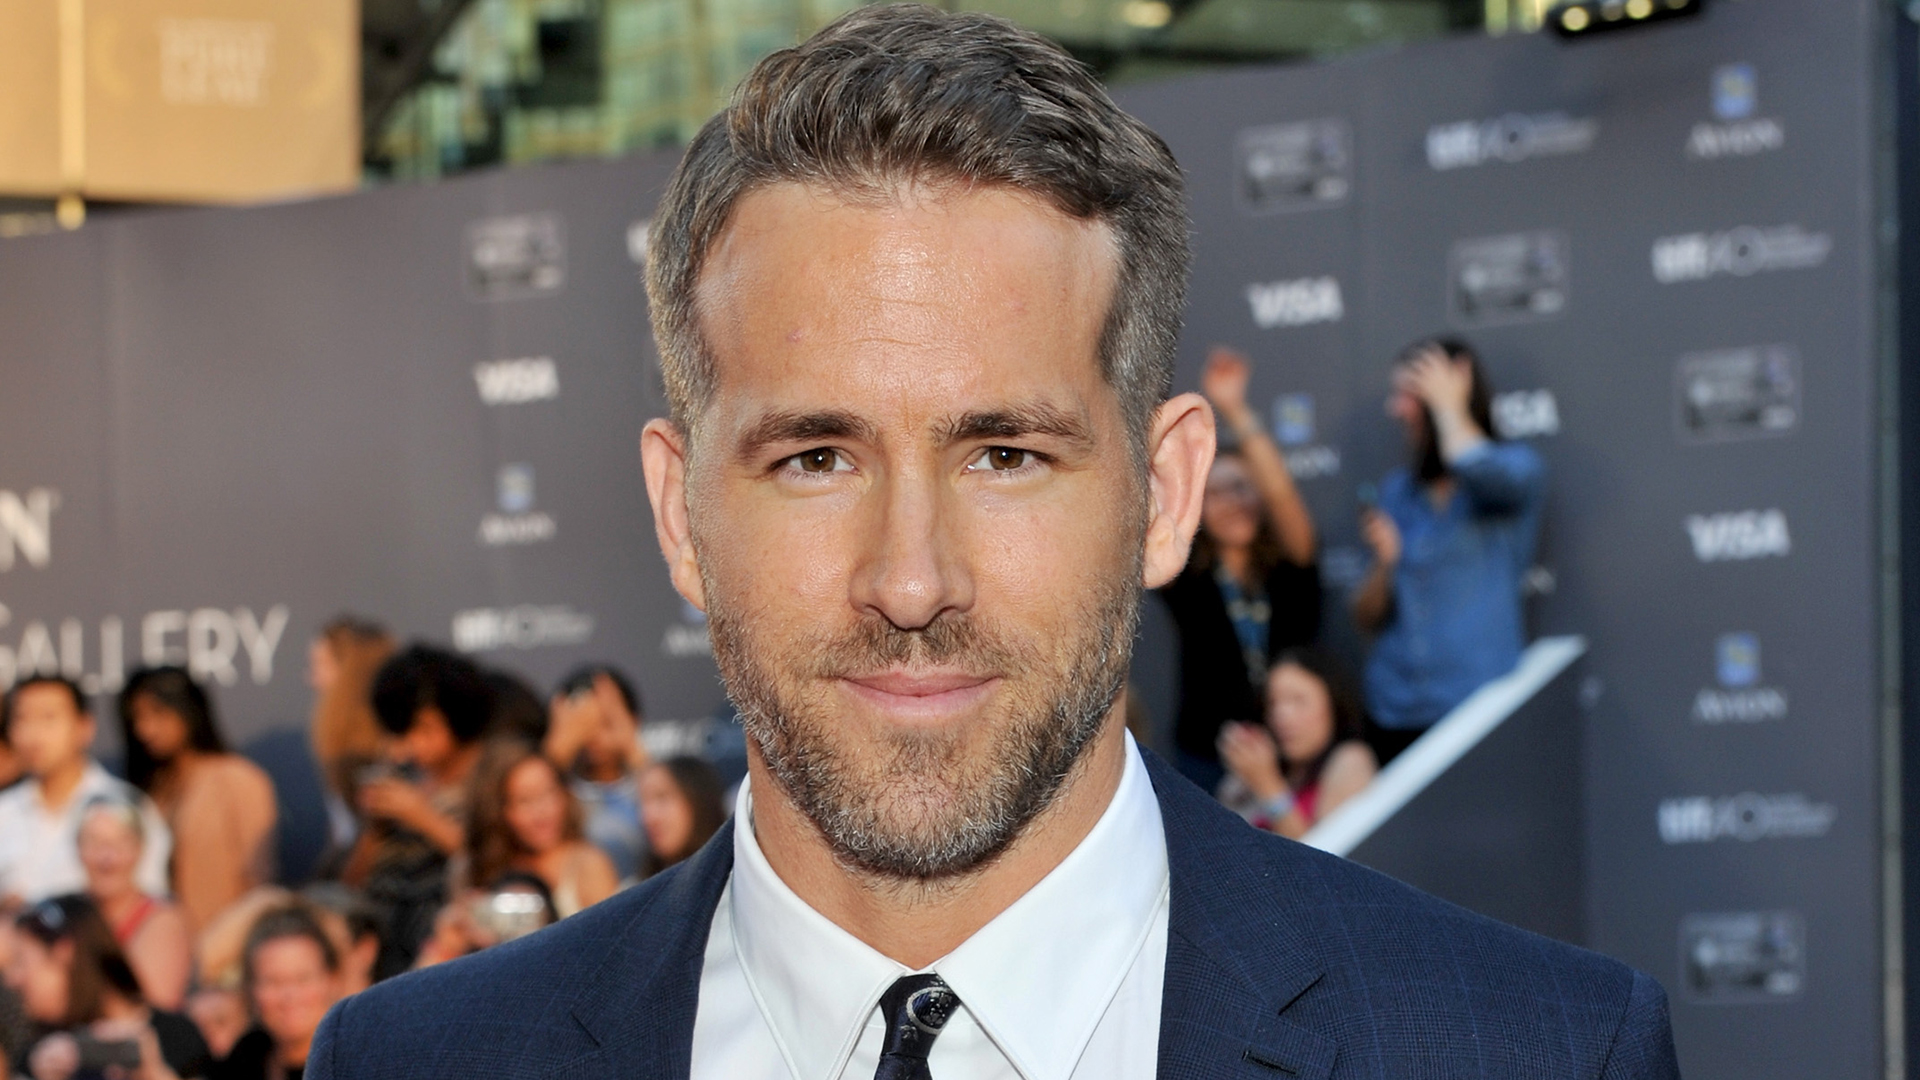 TORONTO, ON - SEPTEMBER 16: Actor Ryan Reynolds attends the "Mississippi Grind" premiere during the 2015 Toronto International Film Festival at Roy Thomson Hall on September 16, 2015 in Toronto, Canada. (Photo by Sonia Recchia/Getty Images)